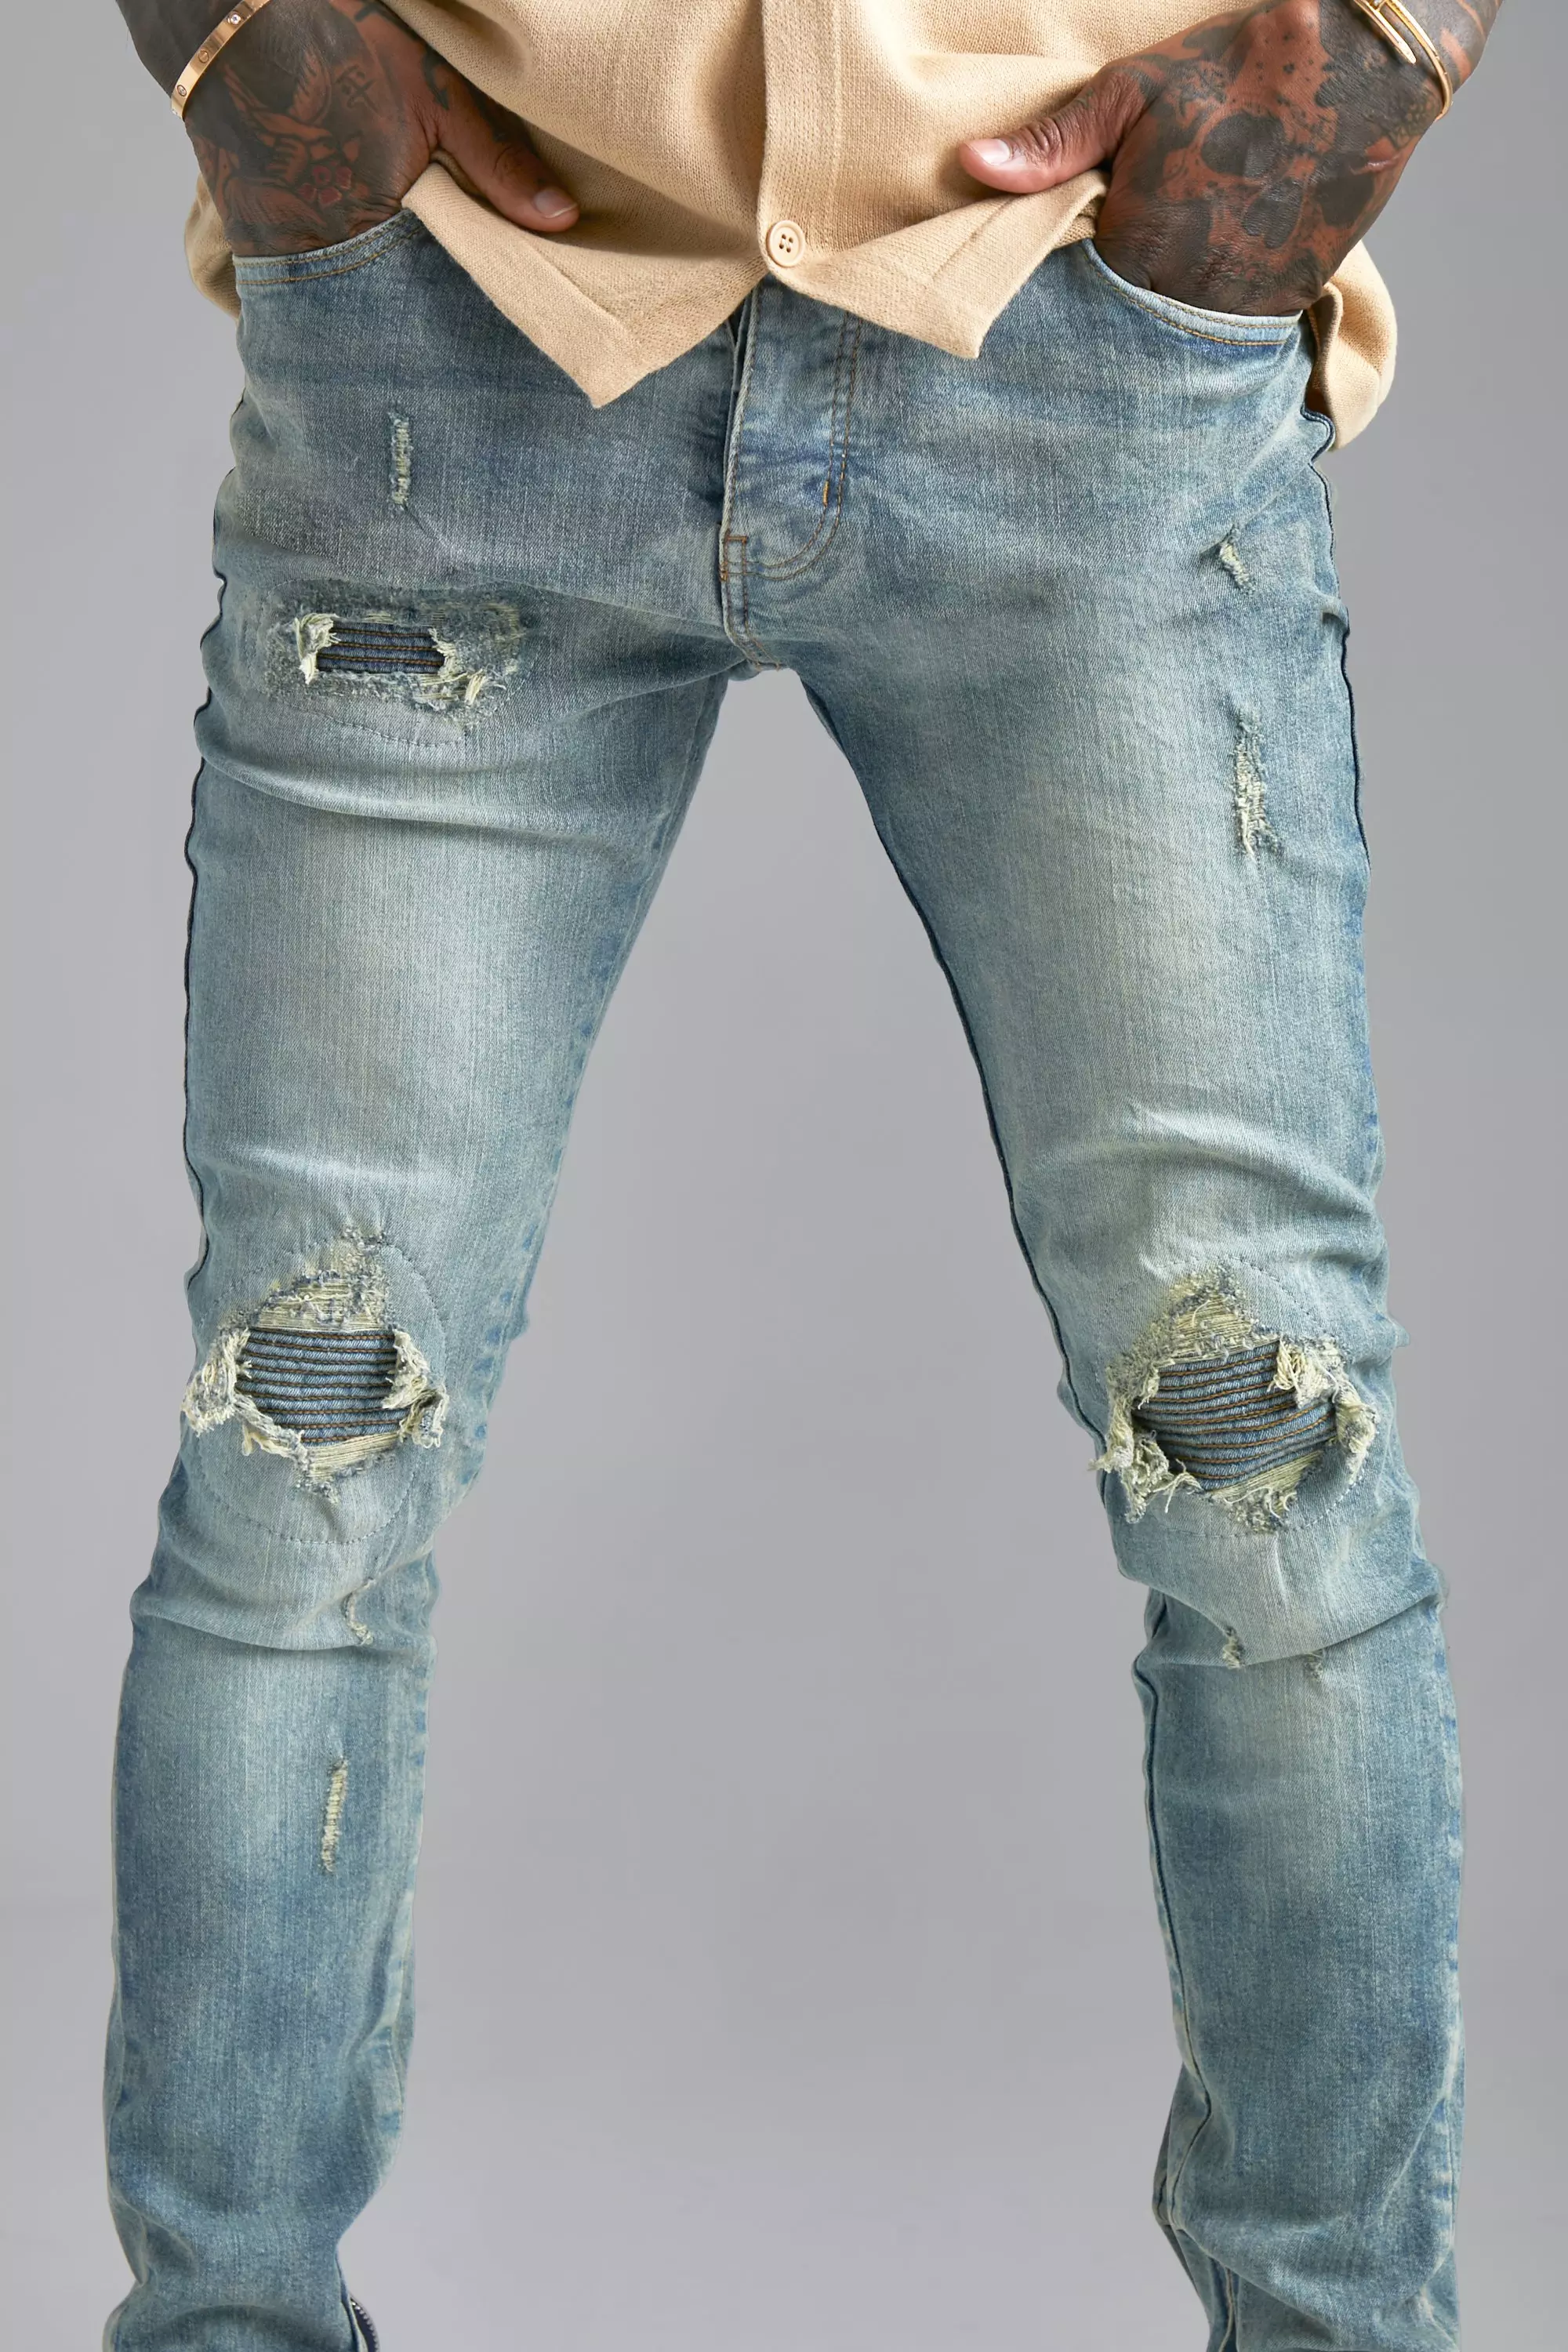 Mens Slim Fit Skinny Jeans With Orange Star Patches Biker Denim Stretch  Cult, Motorcycle Jeans Trendy Long Straight Hip Hop Style With Hole Blue  From Adultclothes, $53.21